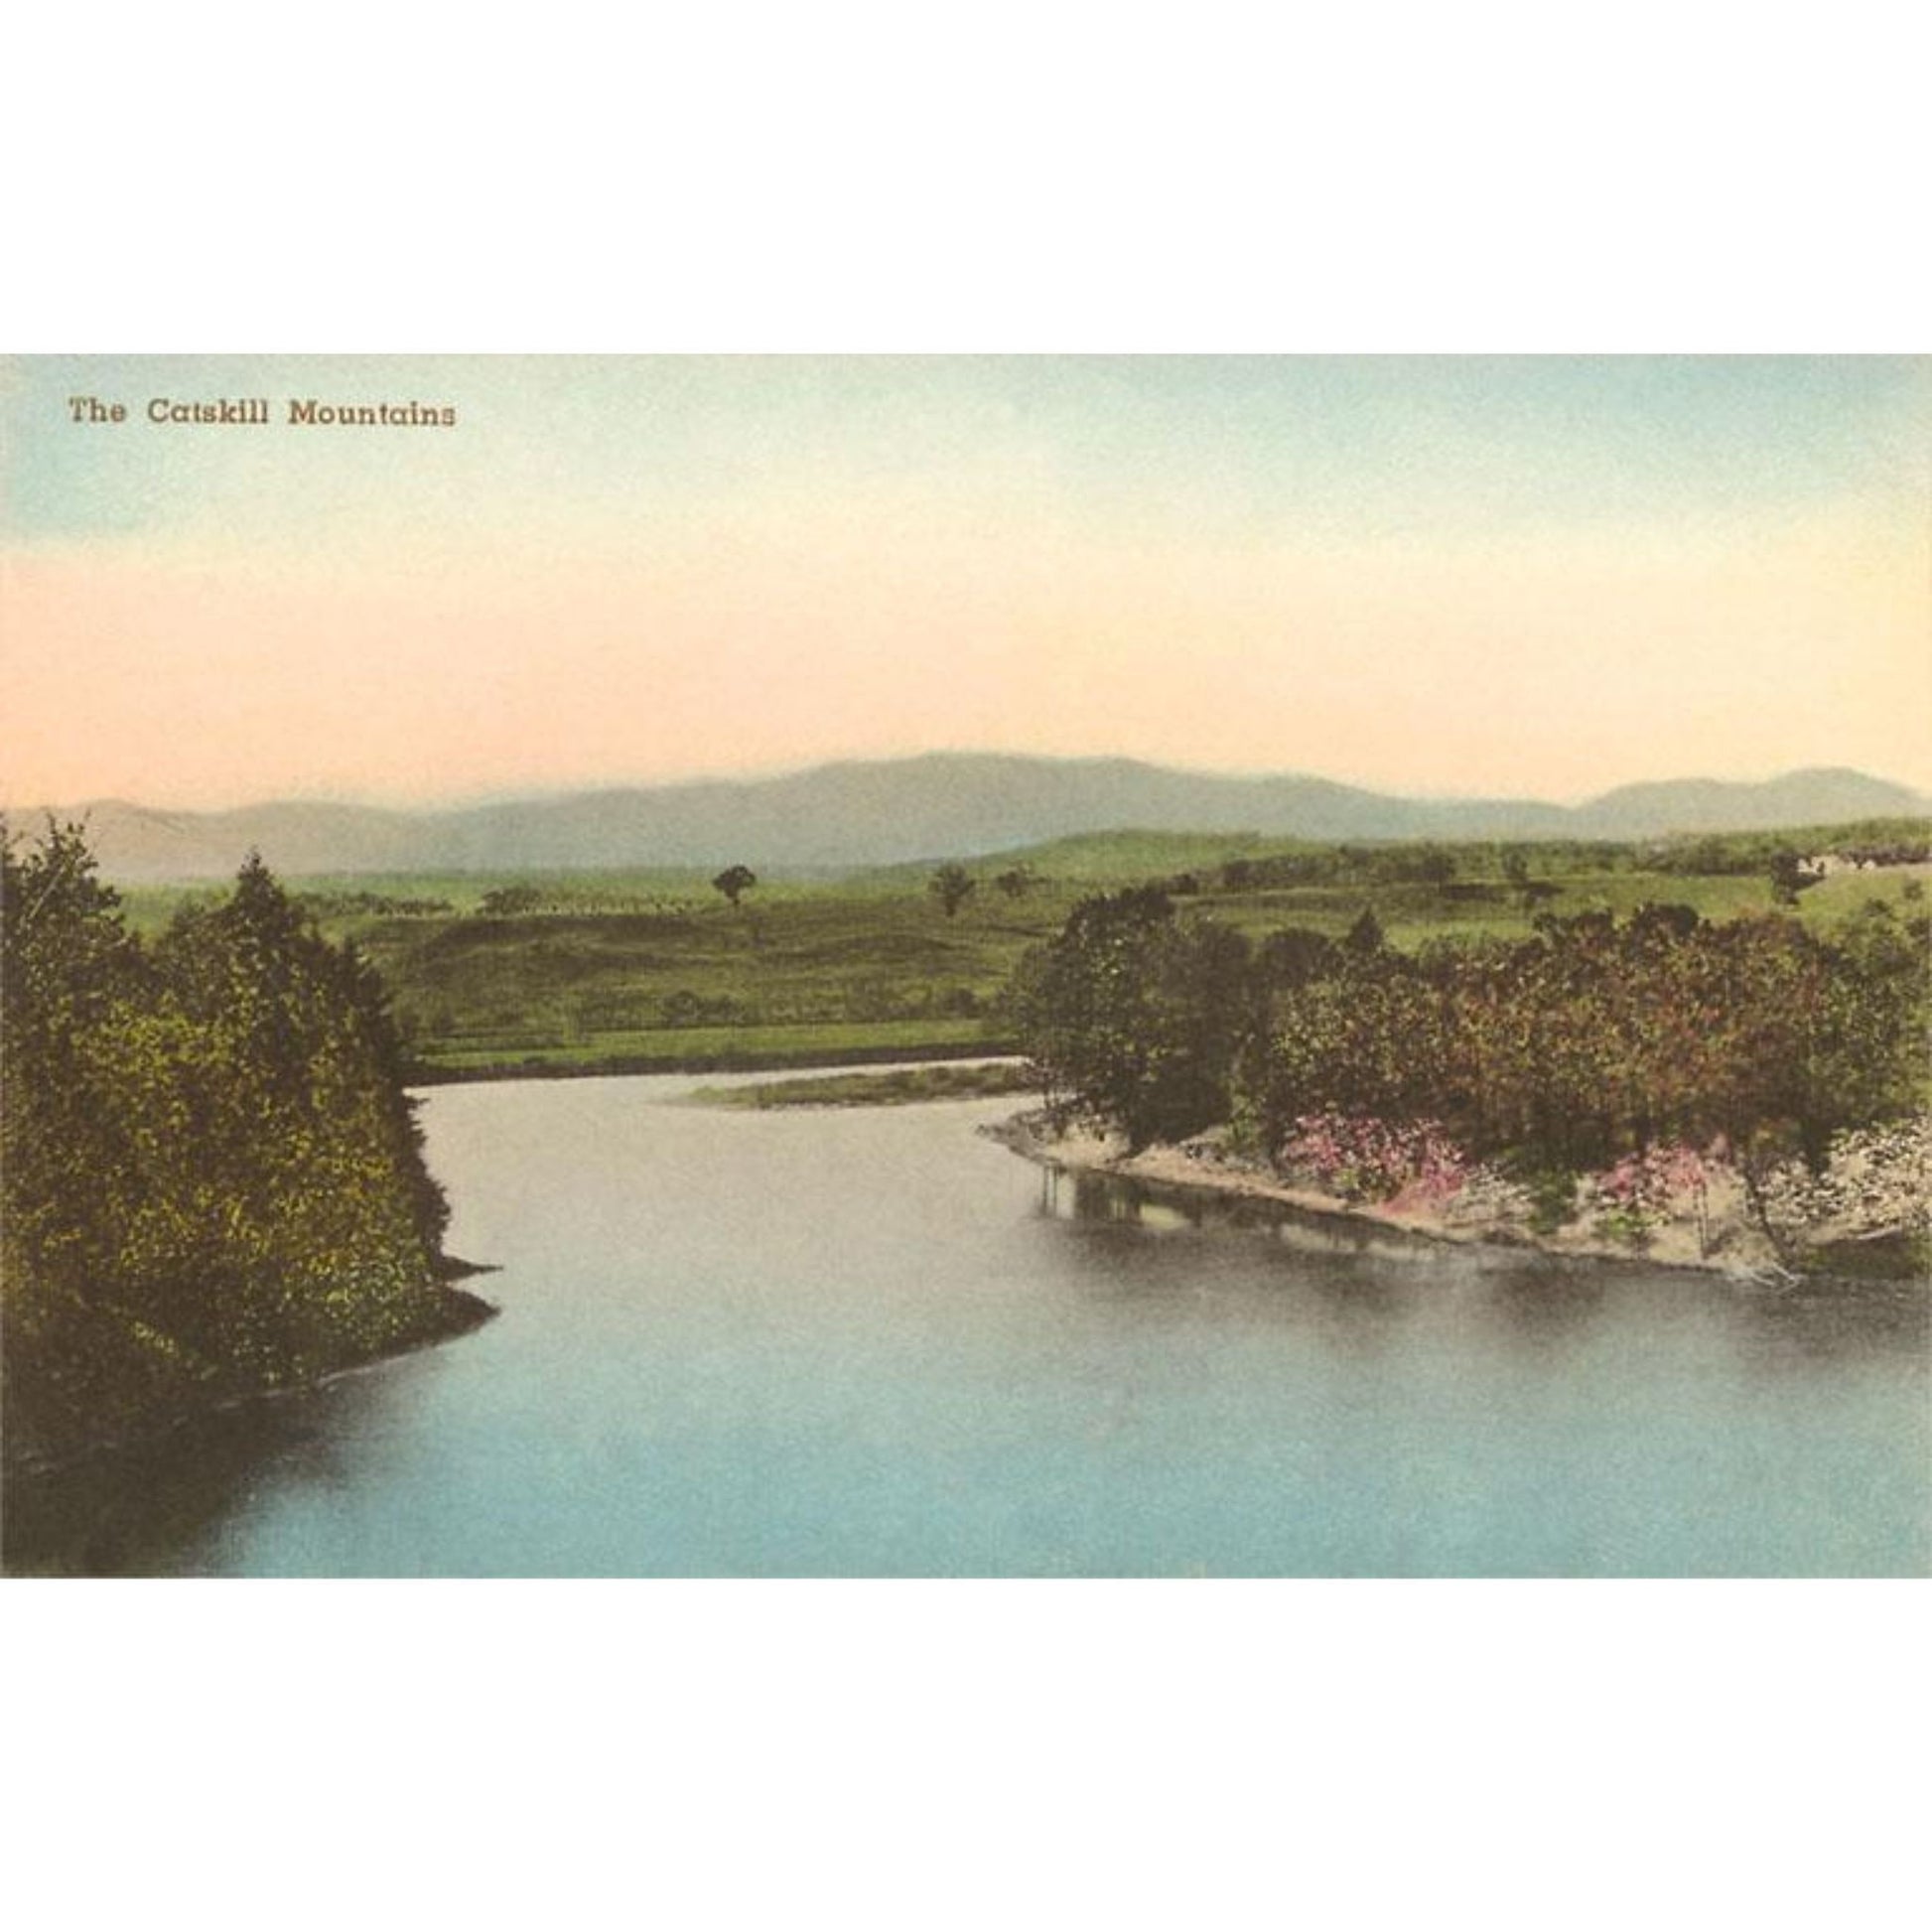 Vintage Postcard with a river in front and the Catskill Mountains in the back.